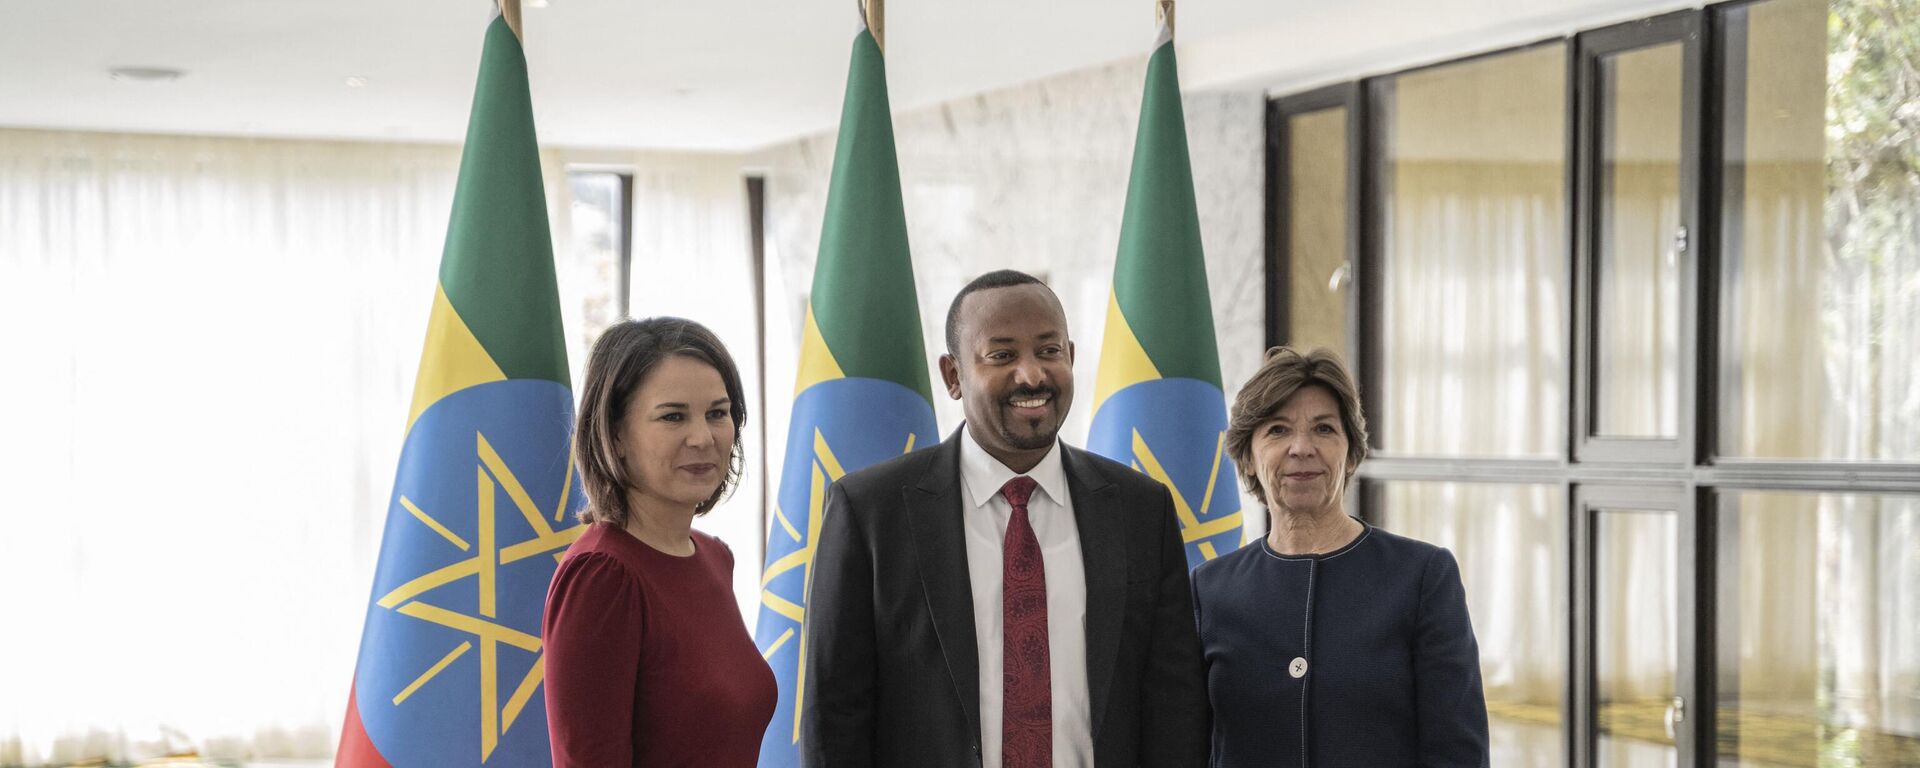 German Federal Minister for Foreign Affairs, Annalena Baerbock (L), Ethiopia Prime Minister Abiy Ahmed (C) and French Foreign and European Affairs Minister, Catherine Colonna (R) pose for a photograph at the Prime Minister office in Addis Ababa, Ethiopia, on January 12, 2023. - Sputnik International, 1920, 14.01.2023